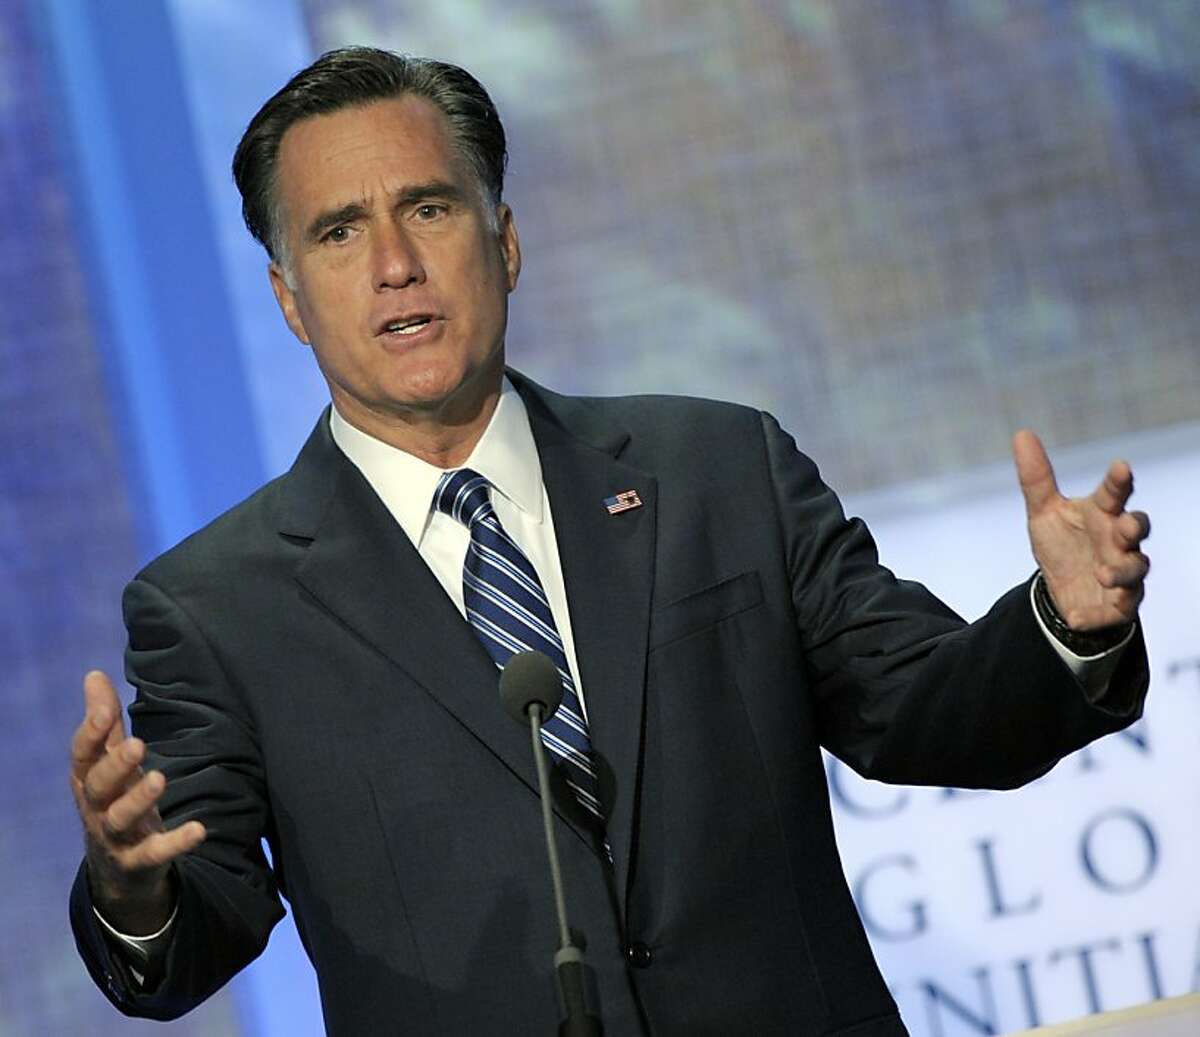 Republican presidential candidate Mitt Romney speaks at the annual meeting of the Clinton Global Initiative (CGI) in New York, U.S., on Tuesday, Sept. 25, 2012.